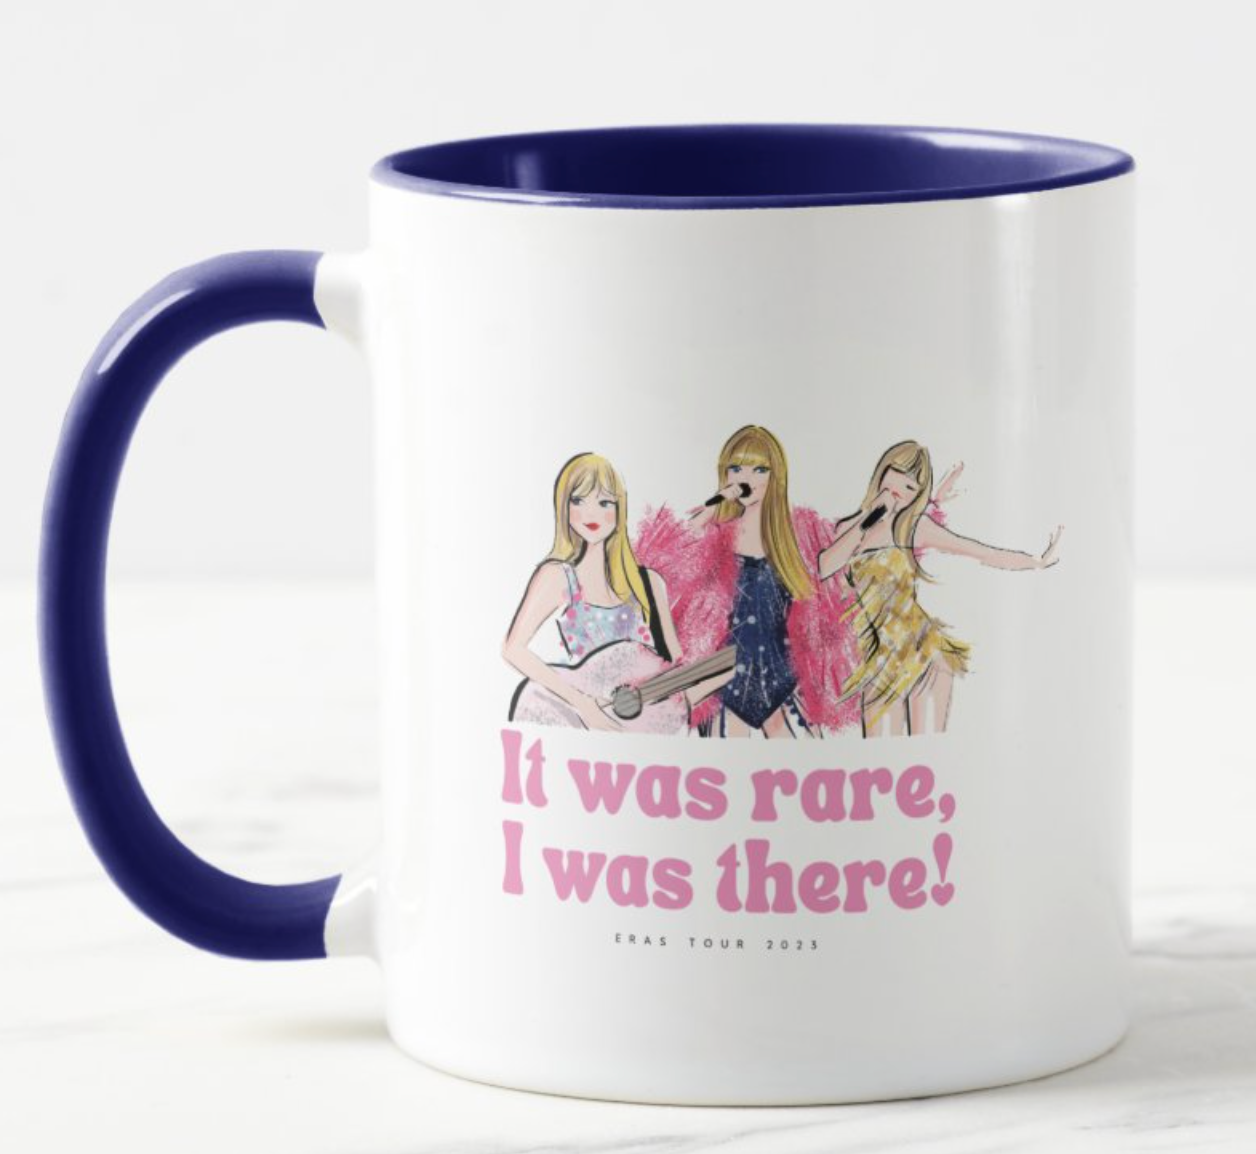 A Lot Going On At The Moment The Eras Tour Taylor Swift Mug